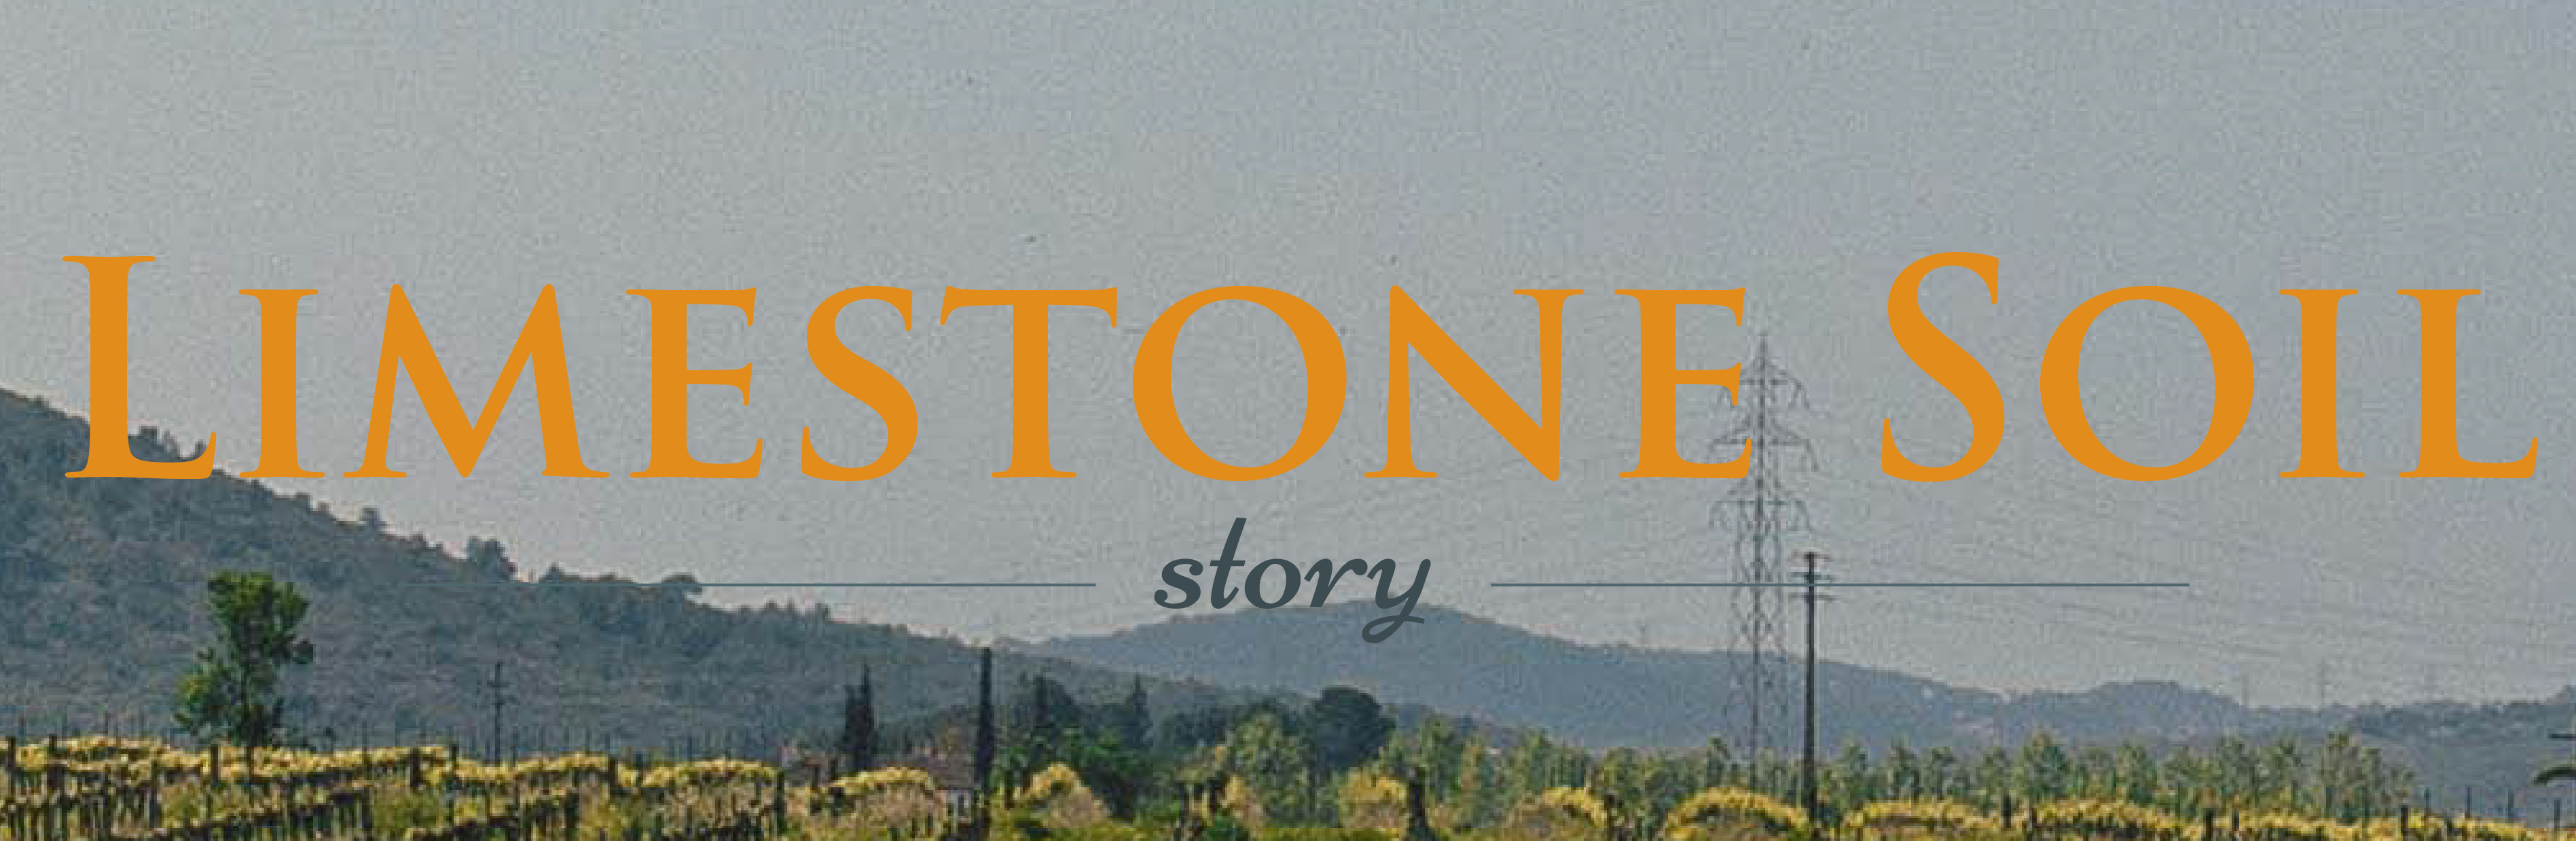 The story of Limestone Soil